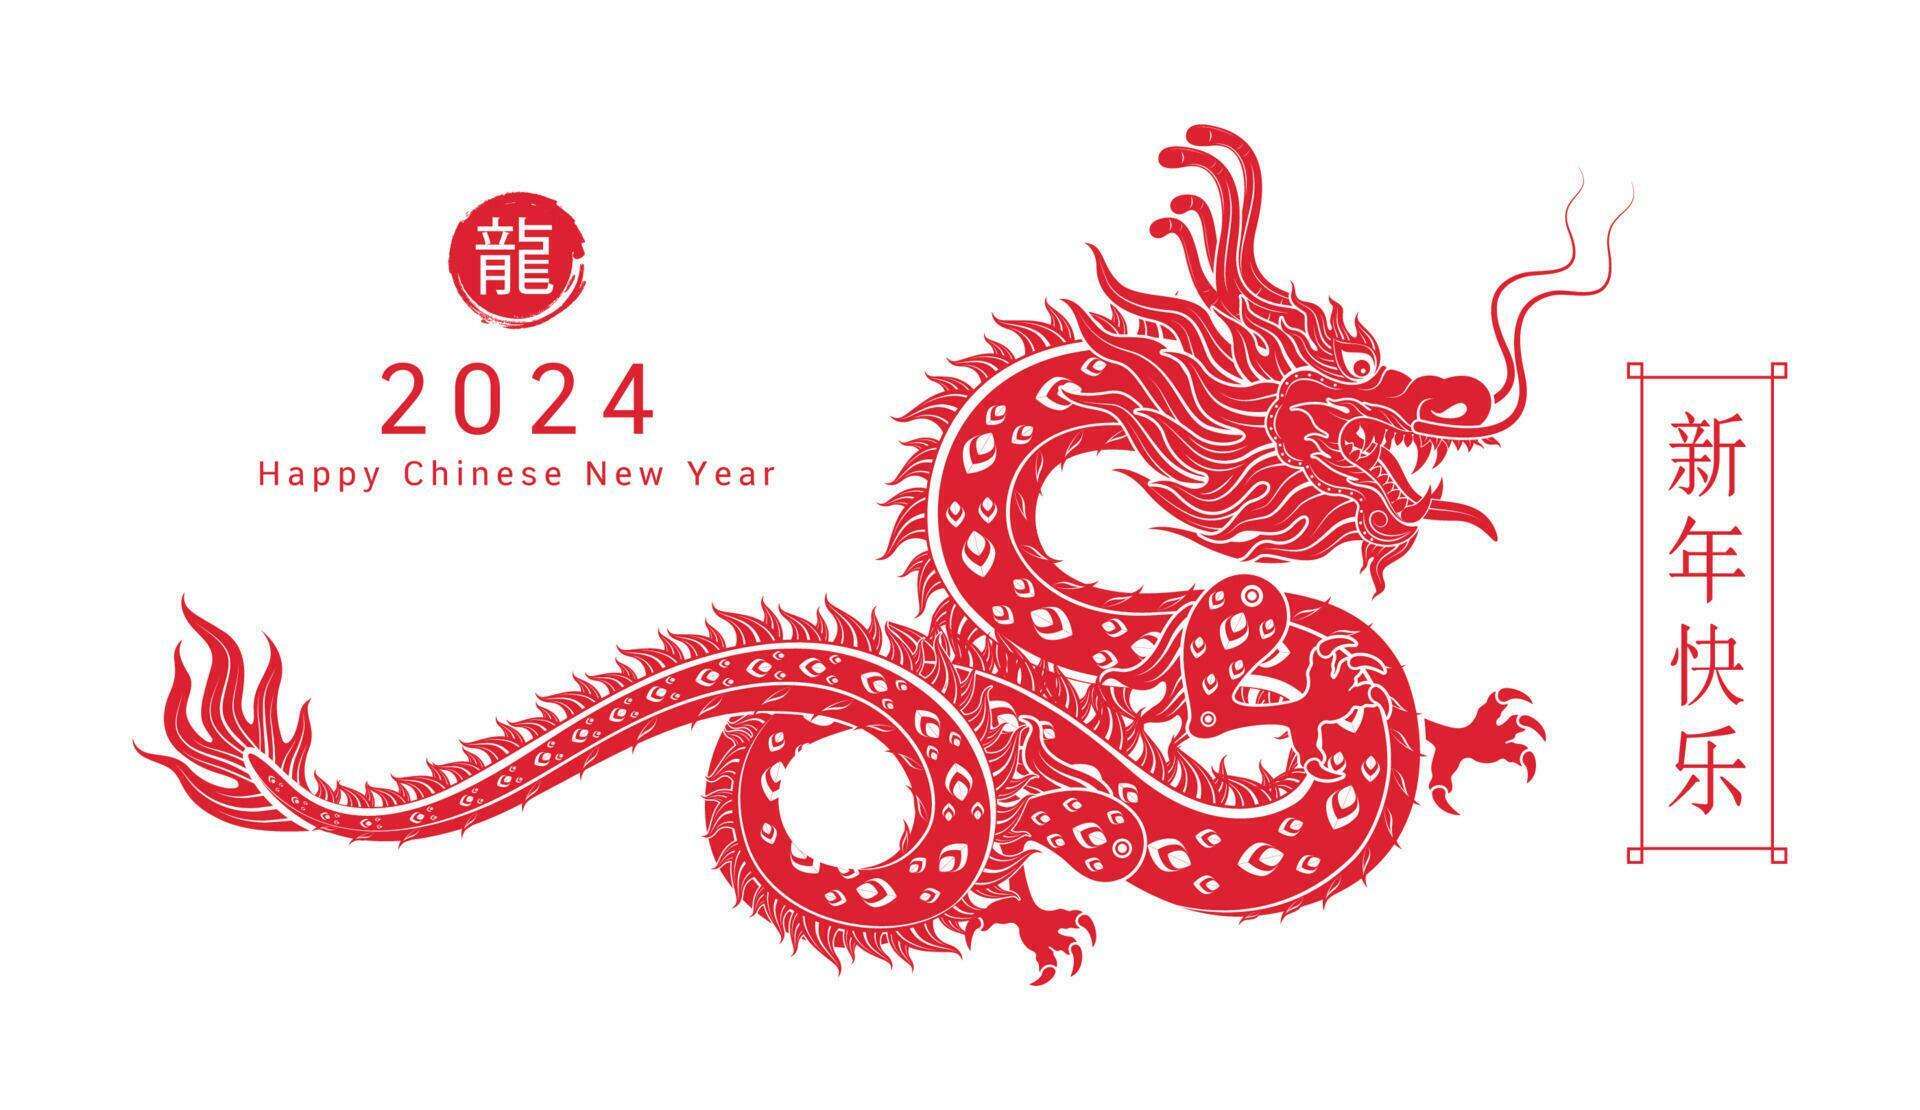 Happy Chinese New Year 2024. Chinese dragon red modern flower pattern